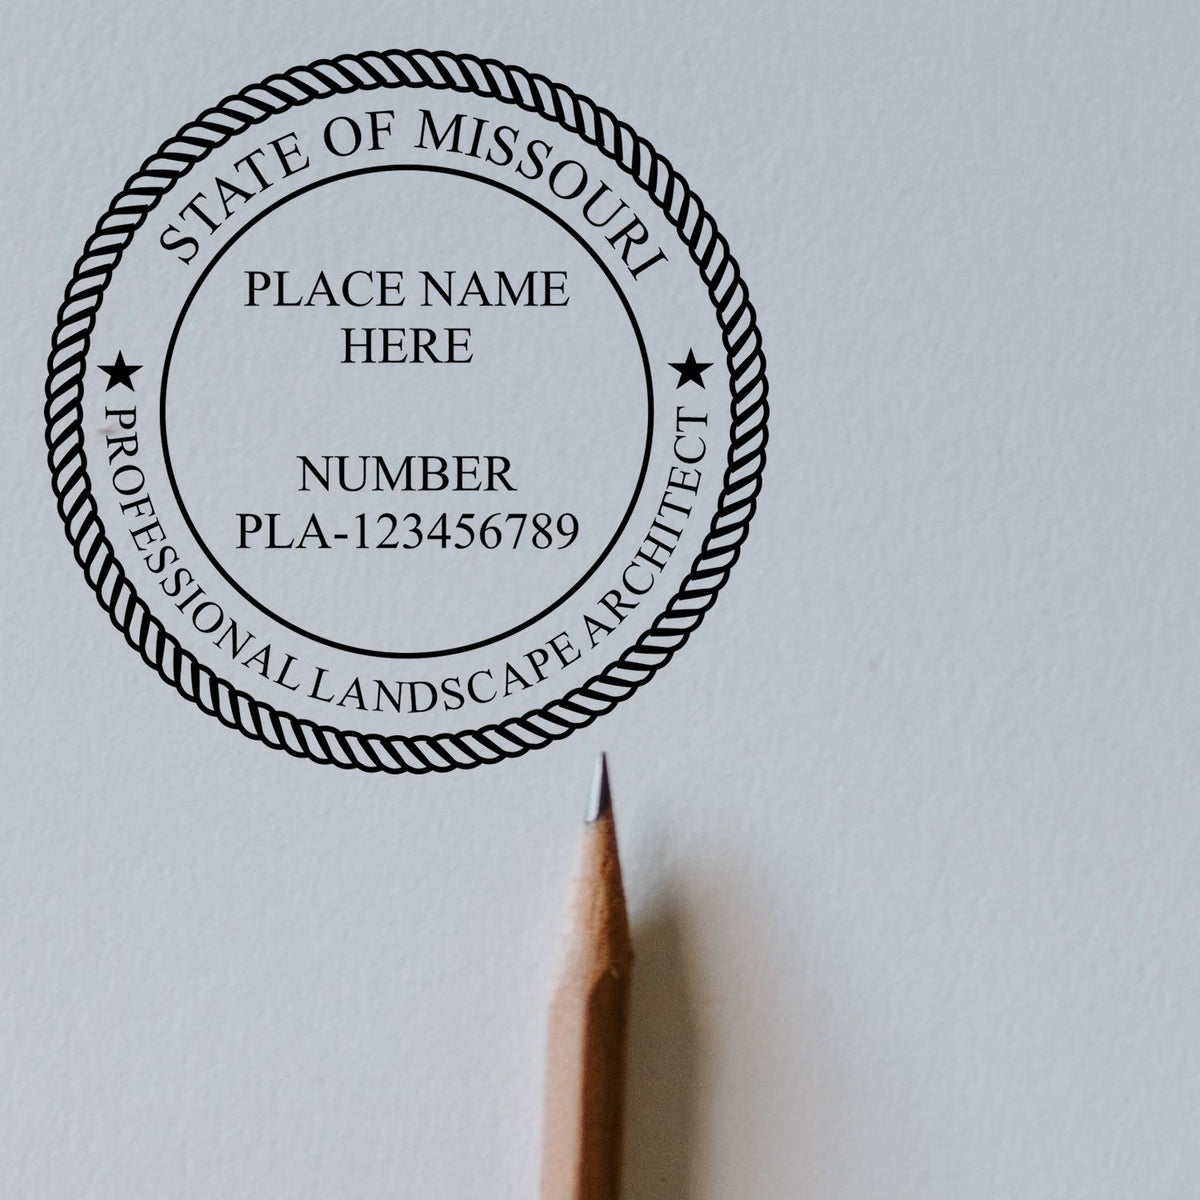 A lifestyle photo showing a stamped image of the Digital Missouri Landscape Architect Stamp on a piece of paper